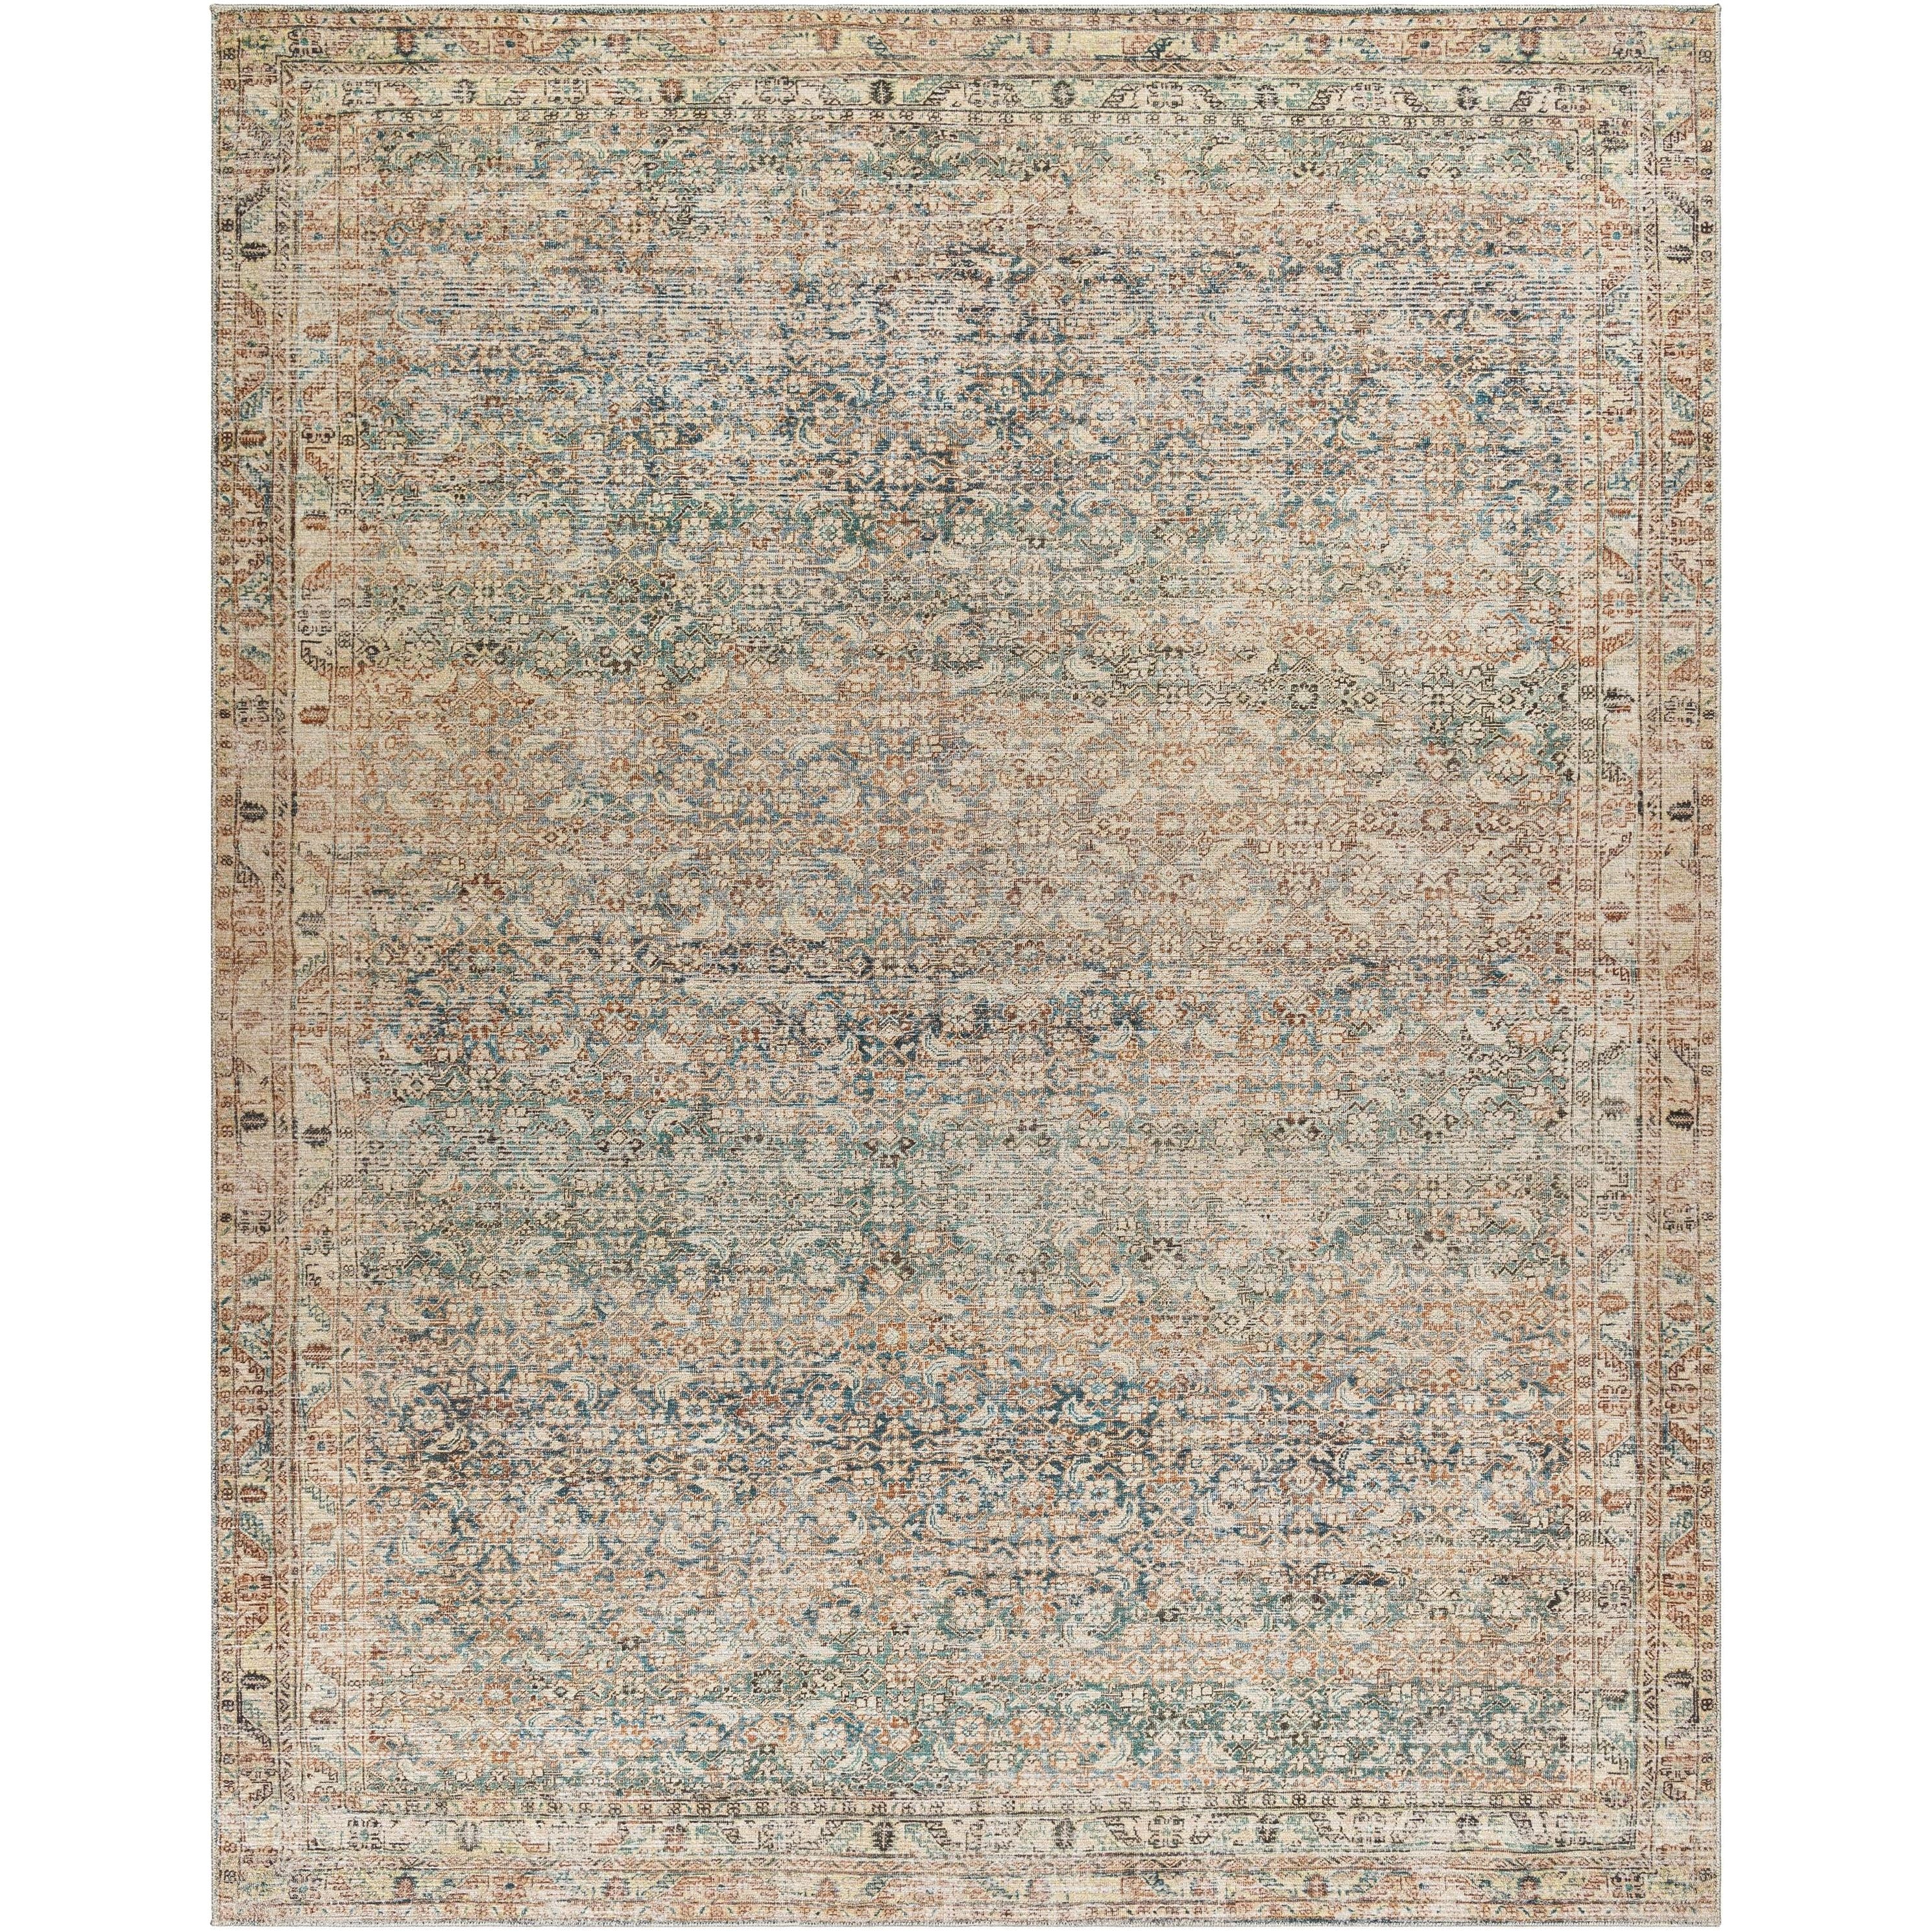 Introducing the Marlene area rug, a stunning piece from our Becki Owens x Surya line to bring you a beautiful style perfect for any space. This vintage-inspired piece is crafted with high-quality polyester and features hues of blue and green that will bring a refreshing, calming ambiance to your room. Amethyst Home provides interior design, new home construction design consulting, vintage area rugs, and lighting in the Miami metro area.